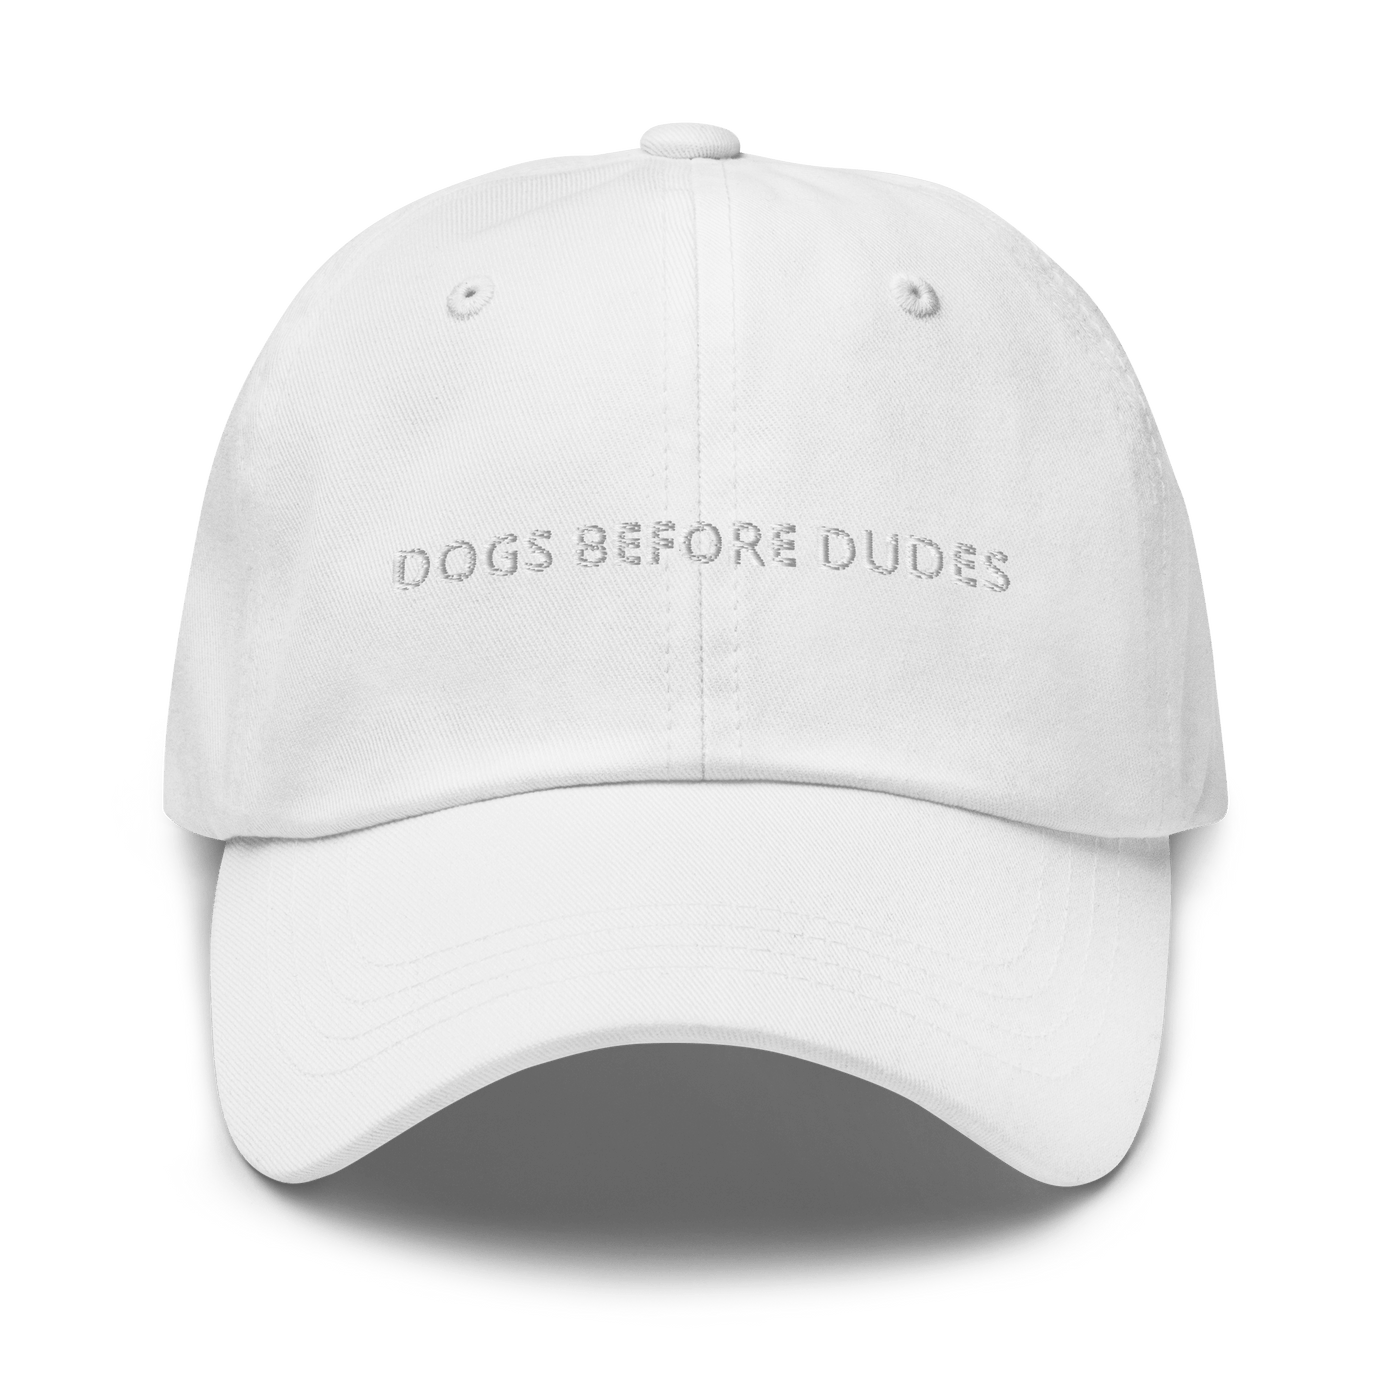 Dogs before Dudes Dad hat - White - - Just Another Cap Store